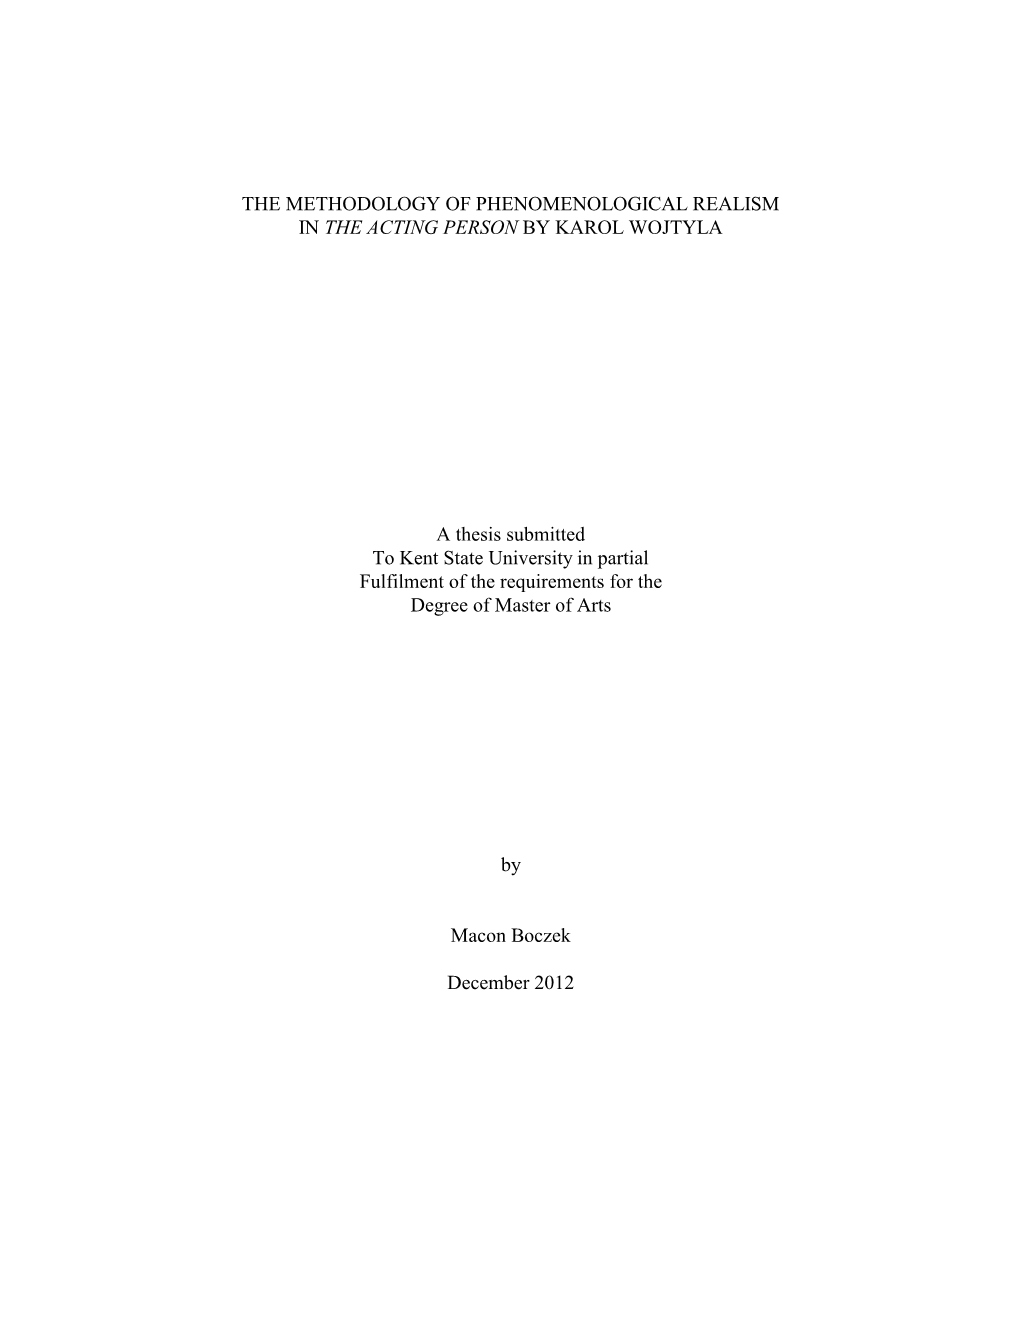 The Methodology of Phenomenological Realism in the Acting Person by Karol Wojtyla